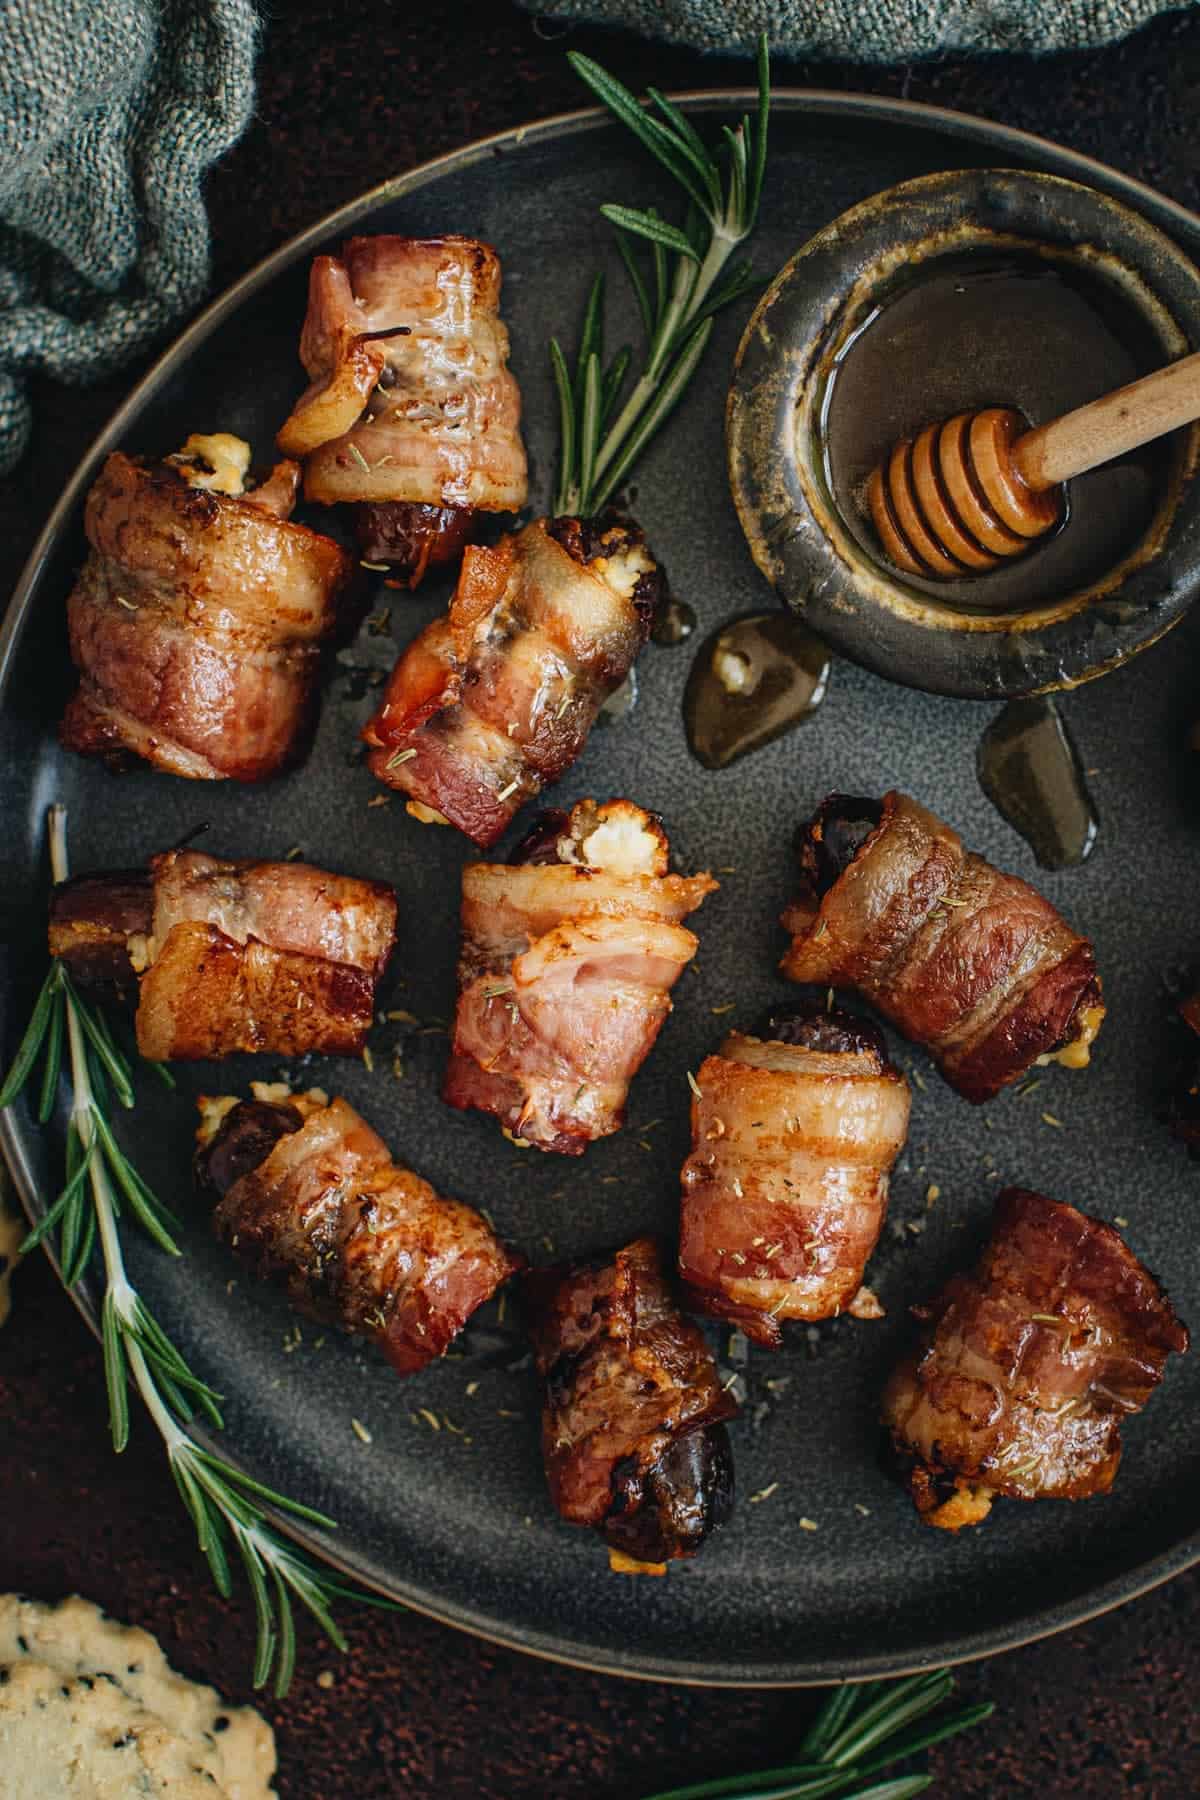 Goat cheese stuffed bacon wrapped dates on a black plate.